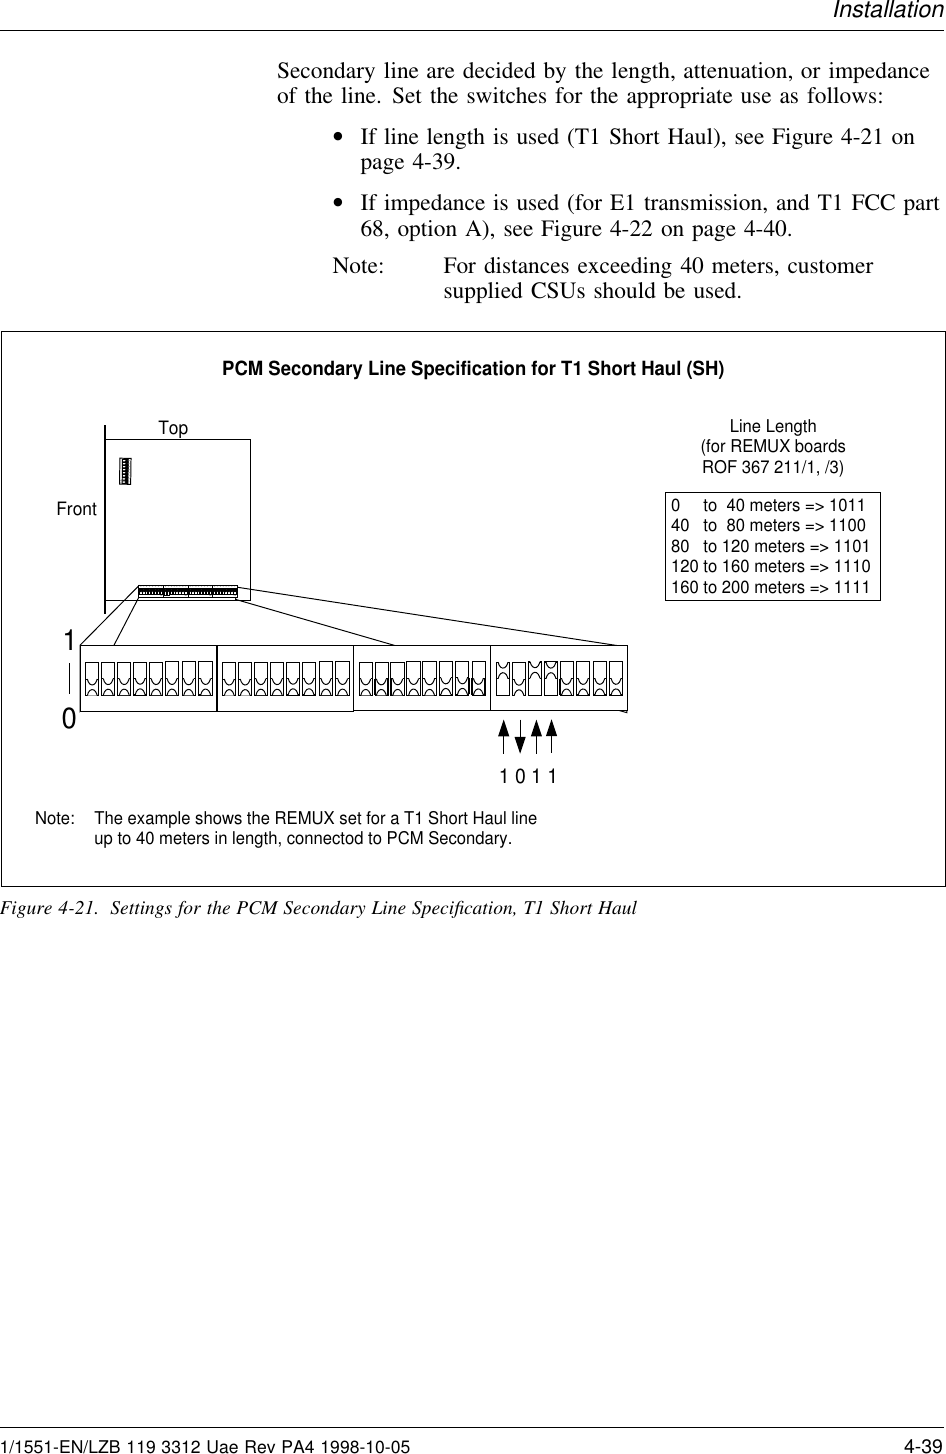 InstallationSecondary line are decided by the length, attenuation, or impedanceof the line. Set the switches for the appropriate use as follows:•If line length is used (T1 Short Haul), see Figure 4-21 onpage 4-39.•If impedance is used (for E1 transmission, and T1 FCC part68, option A), see Figure 4-22 on page 4-40.Note: For distances exceeding 40 meters, customersupplied CSUs should be used.101 0 1 1Top12345678ON12345678ON12345678ON12345678ON12345678ONFrontPCM Secondary Line Specification for T1 Short Haul (SH)The example shows the REMUX set for a T1 Short Haul lineup to 40 meters in length, connectod to PCM Secondary.Note:0     to  40 meters =&gt; 101140   to  80 meters =&gt; 110080   to 120 meters =&gt; 1101120 to 160 meters =&gt; 1110160 to 200 meters =&gt; 1111Line Length(for REMUX boardsROF 367 211/1, /3)Figure 4-21. Settings for the PCM Secondary Line Speciﬁcation, T1 Short Haul1/1551-EN/LZB 119 3312 Uae Rev PA4 1998-10-05 4-39